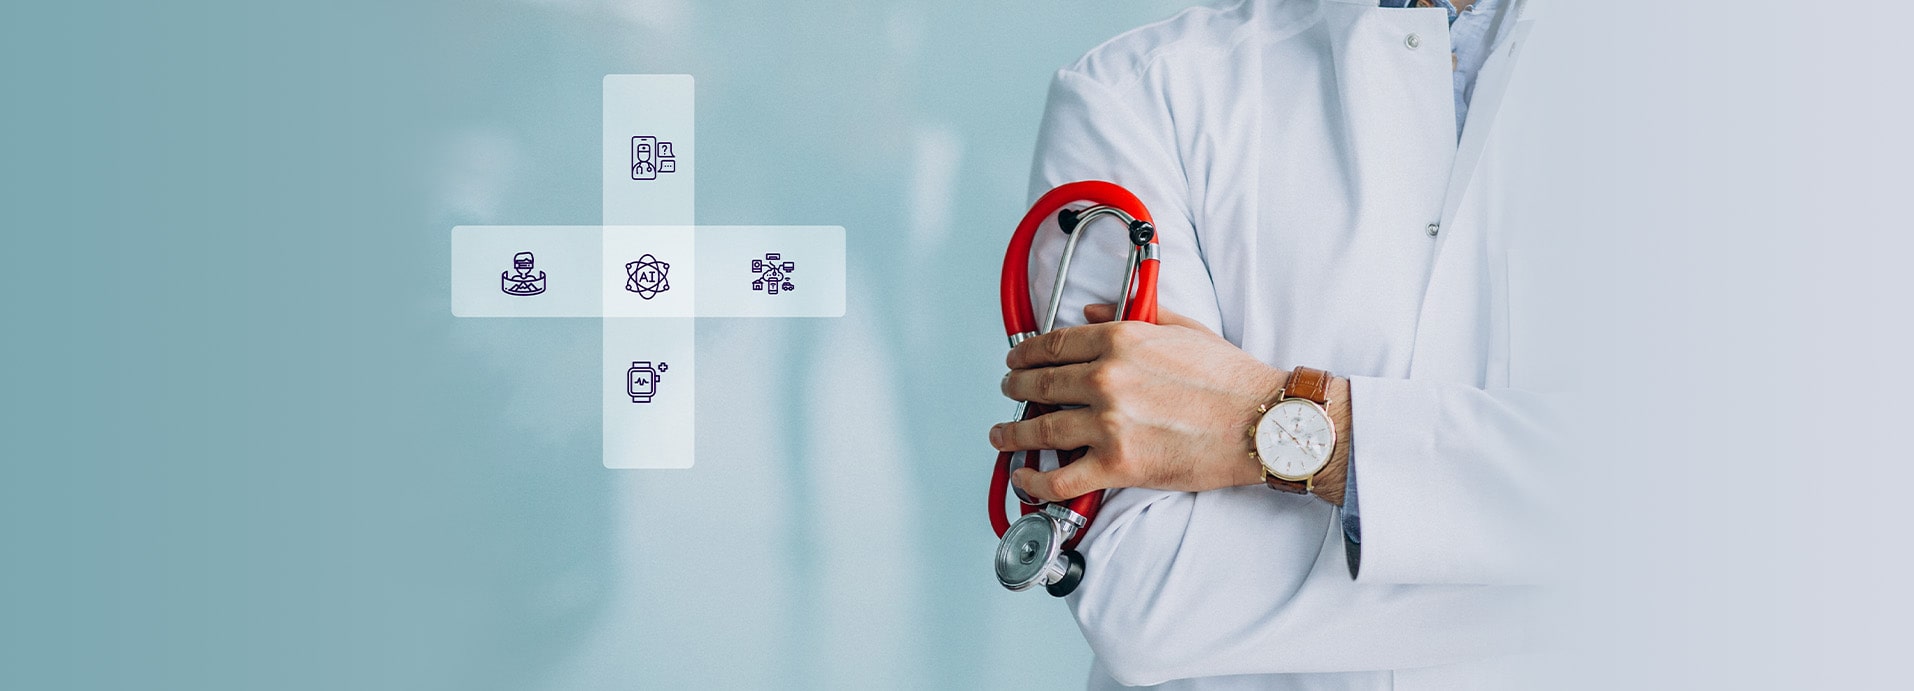 Top 5 Digital Transformation Trends in the Healthcare Industry In 2023 and Beyond